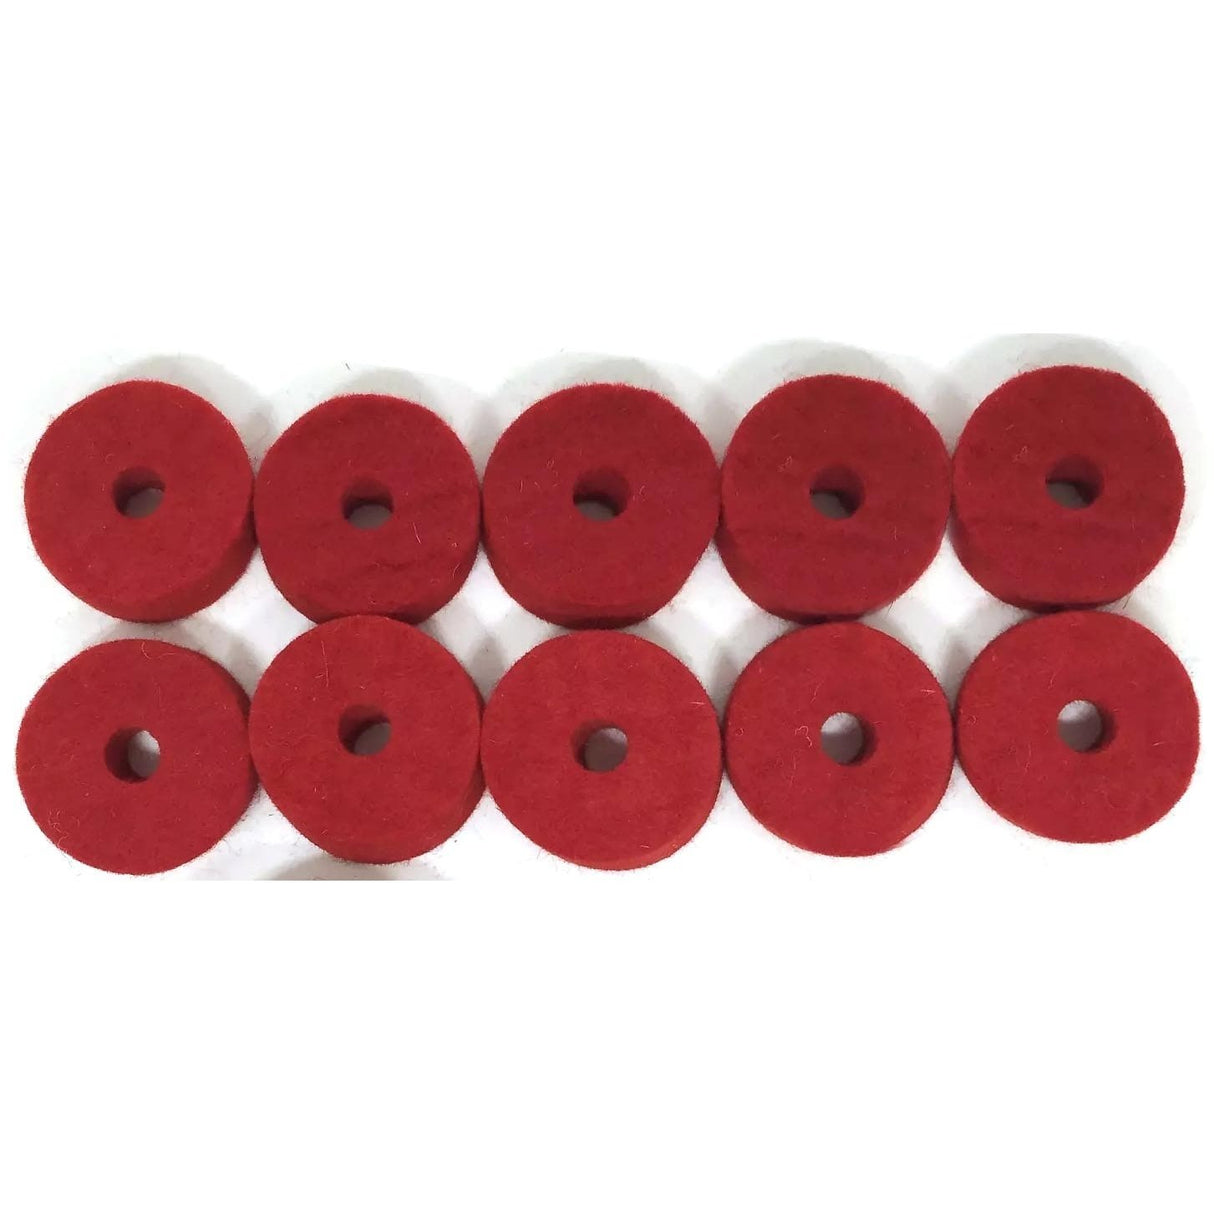 Ahead Red Wool Cymbal Felts, 10 pack 1.5" x .5"